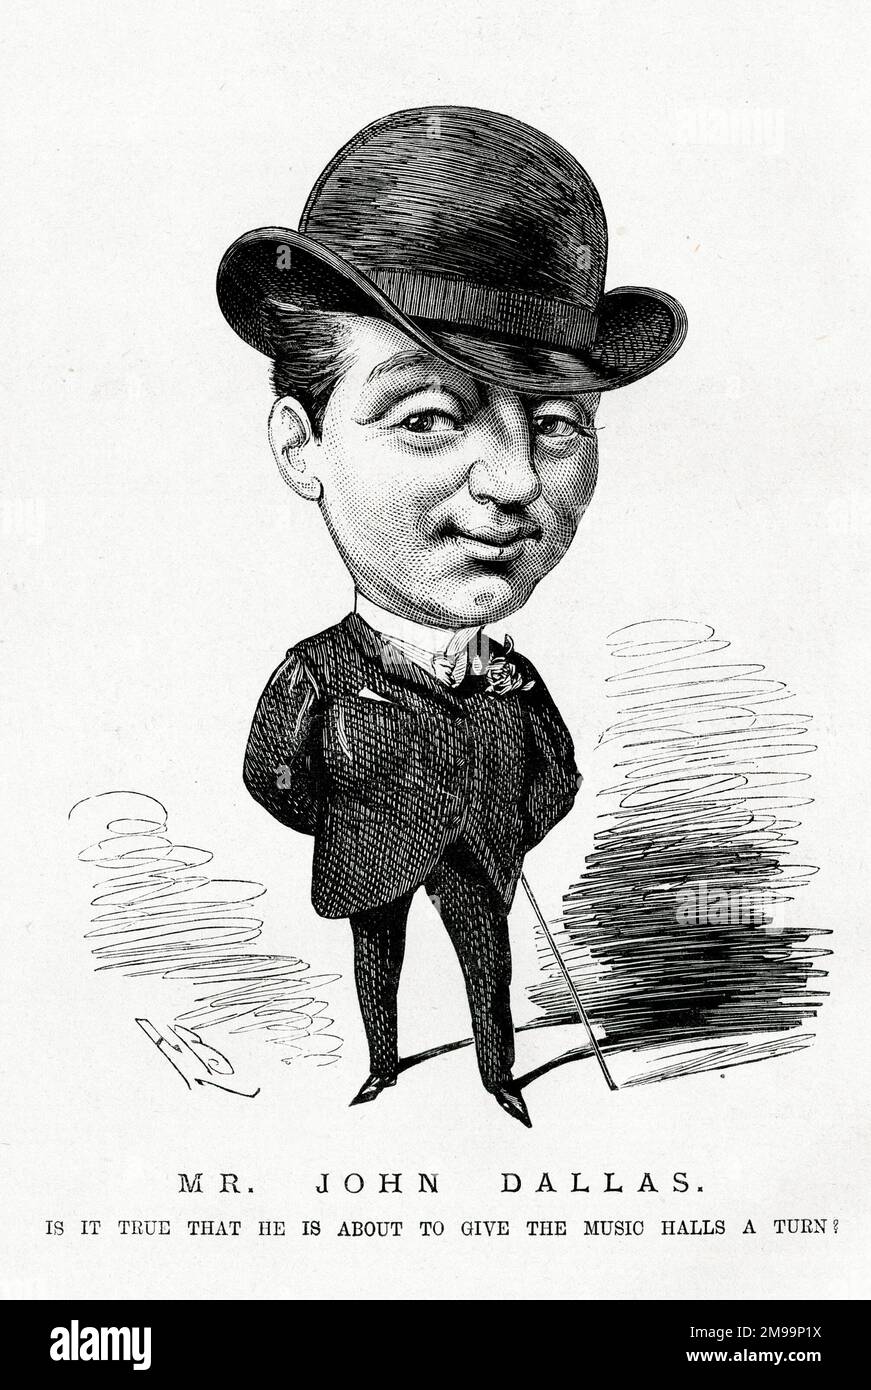 Cartoon portrait, Mr John Dallas, actor - Is it true that he is about to give the music halls a turn? Stock Photo